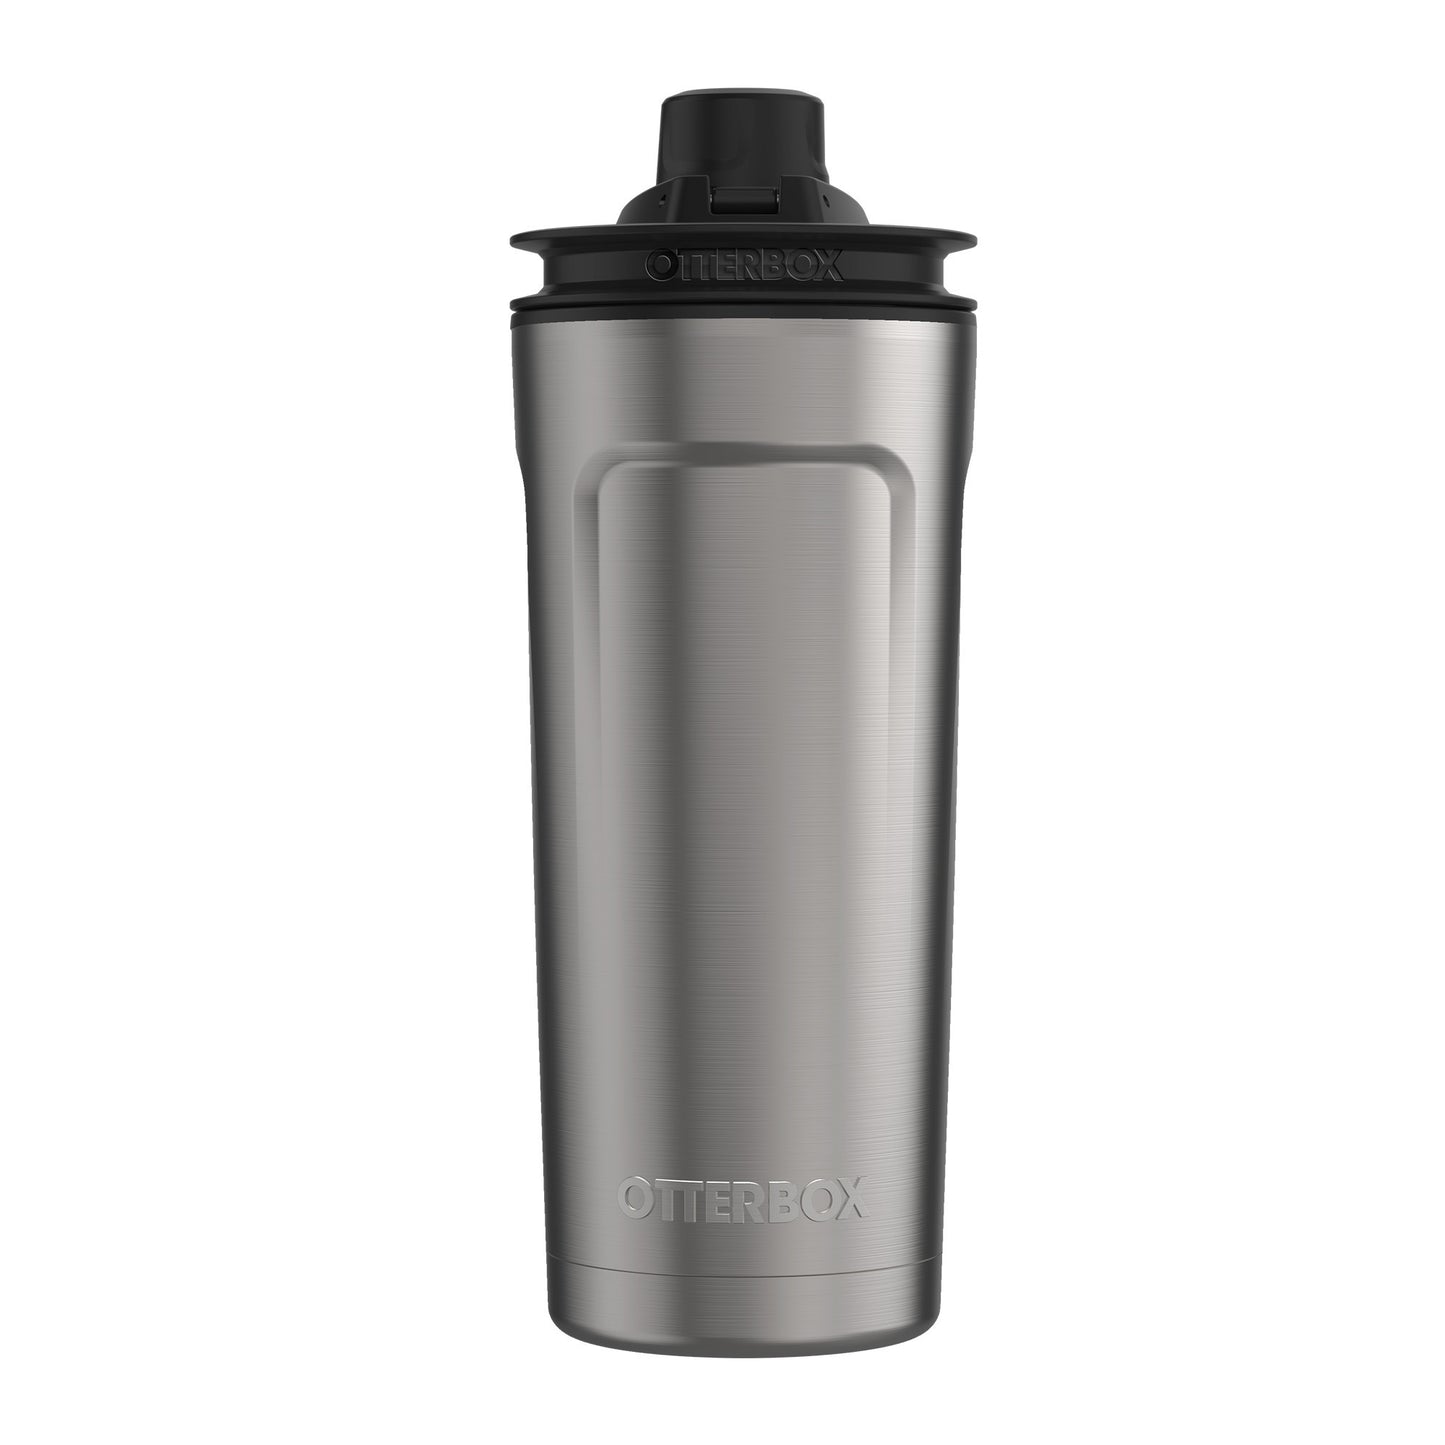 Otterbox 20oz Stainless Steel Elevation Tumbler w/Hydra Lid - 15-08823